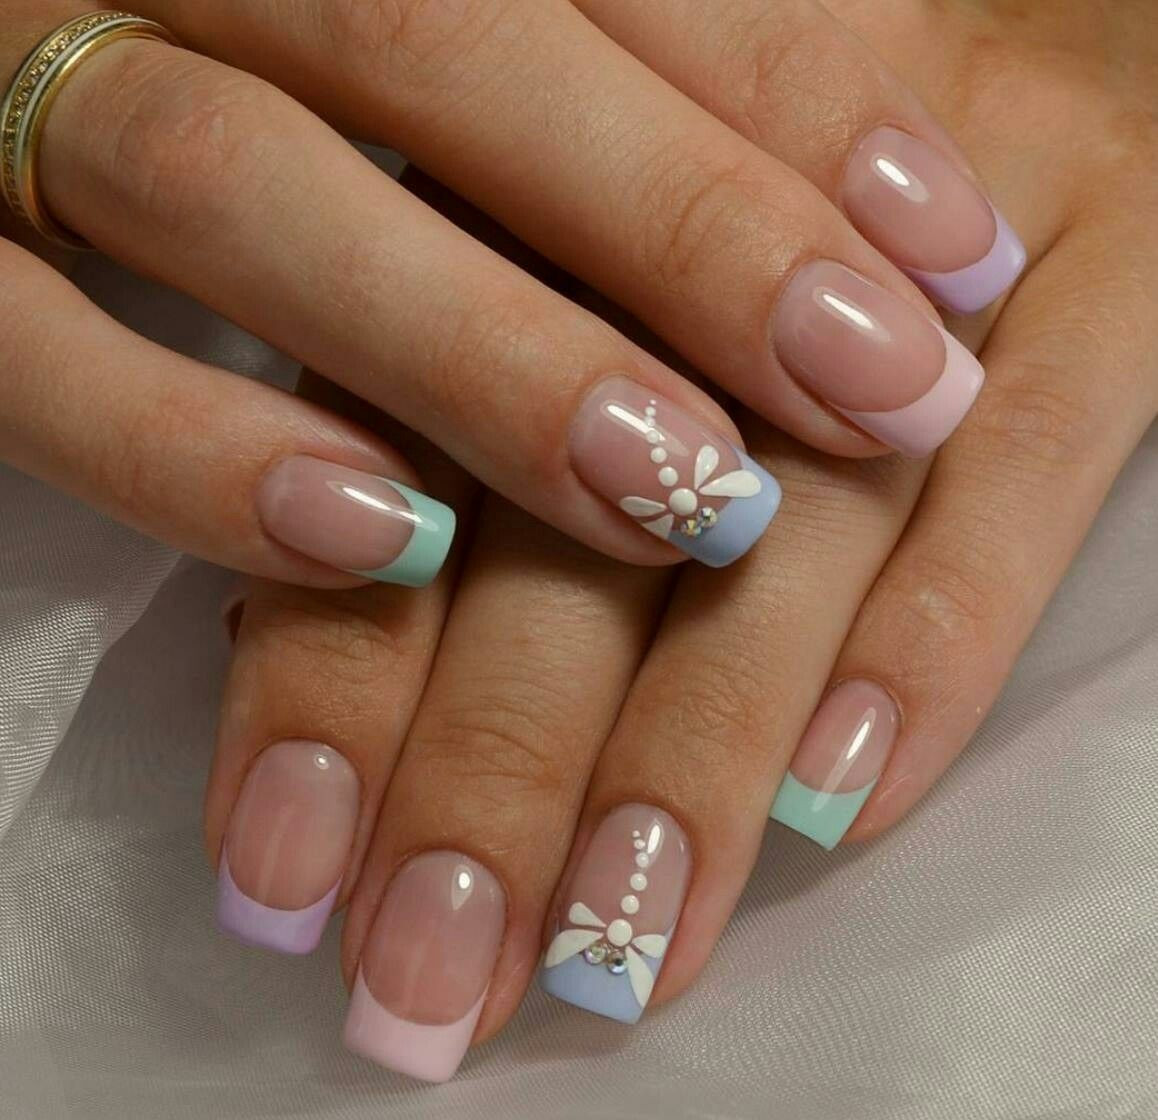 Spring French Nail Designs
 Pin by Kristi Tate on nails in 2019